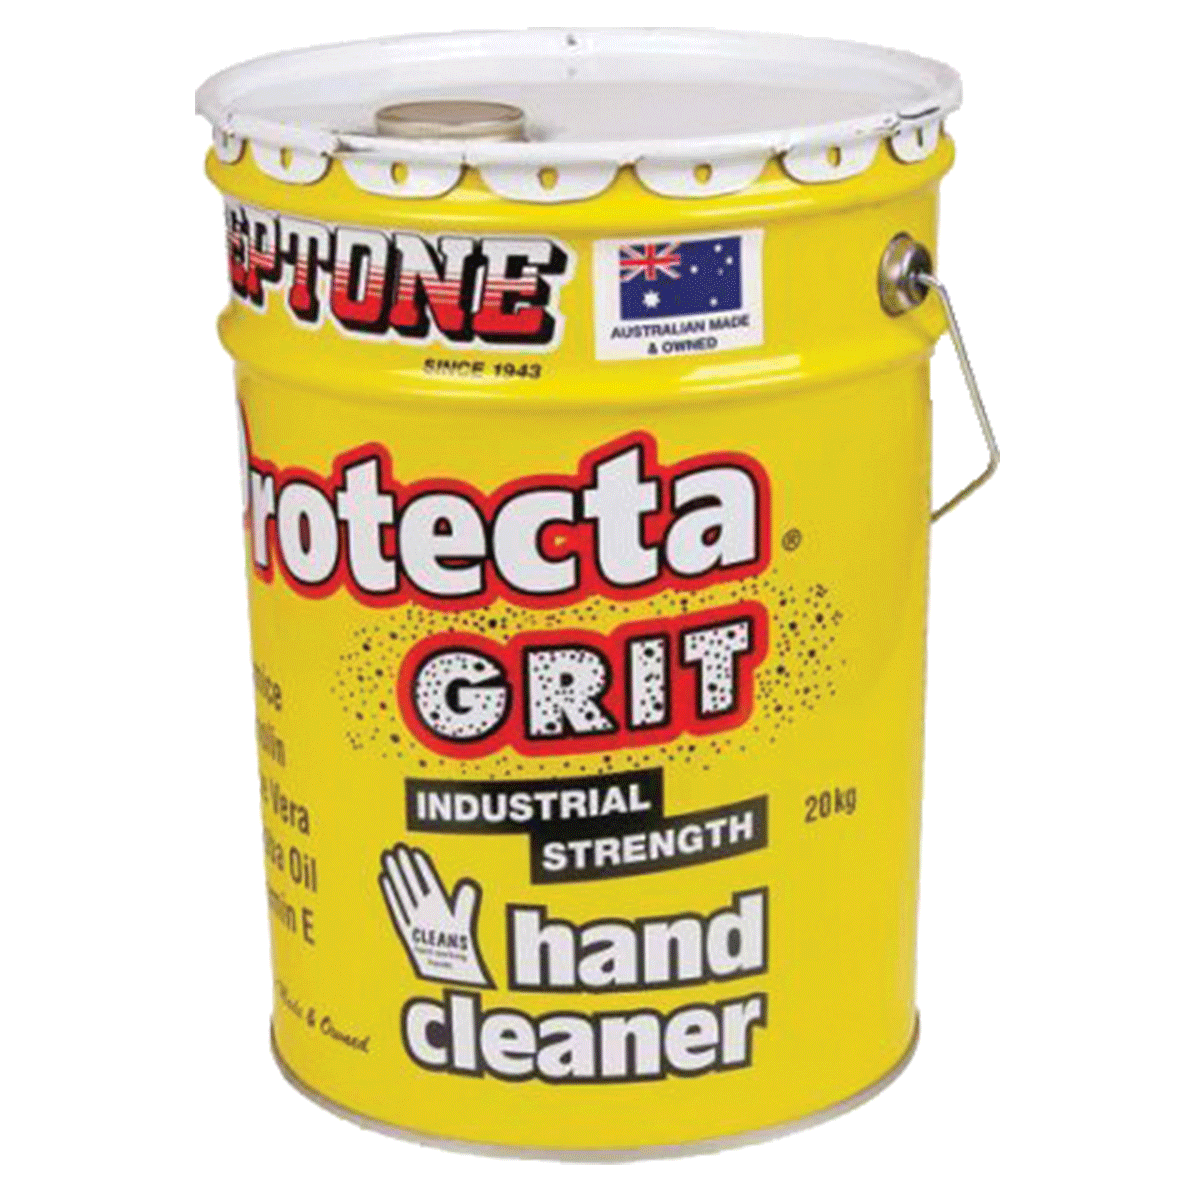 Hand Cleaner - wide range of hard cleaning products - cleaning hand products